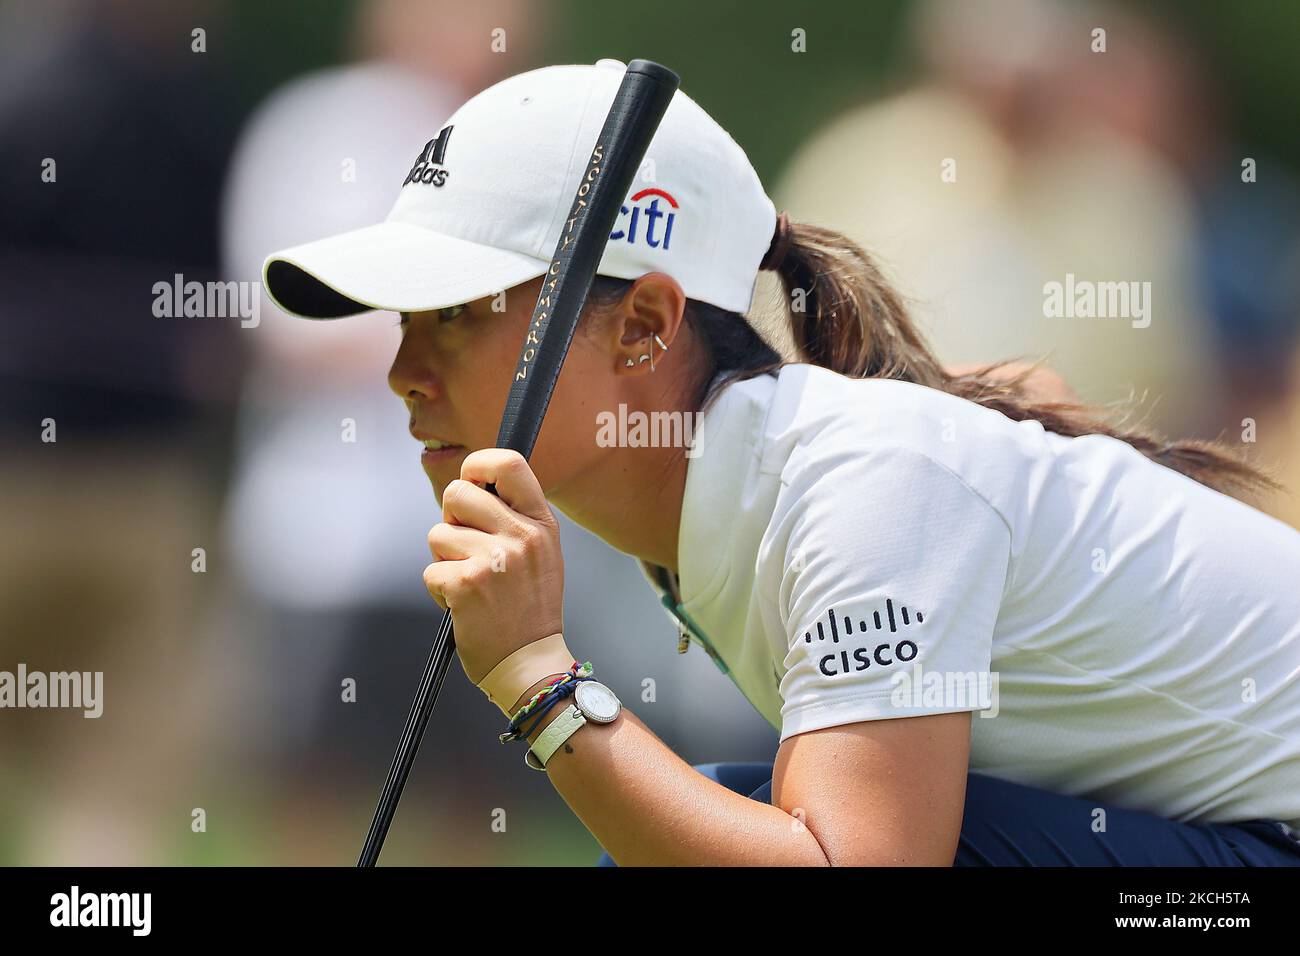 Danielle Kang of Las Vegas, Nevada lines up her putt on the 17th green during the third round of the Marathon LPGA Classic golf tournament at Highland Meadows Golf Club in Sylvania, Ohio, USA Saturday, July 10, 2021. (Photo by Amy Lemus/NurPhoto) Stock Photo